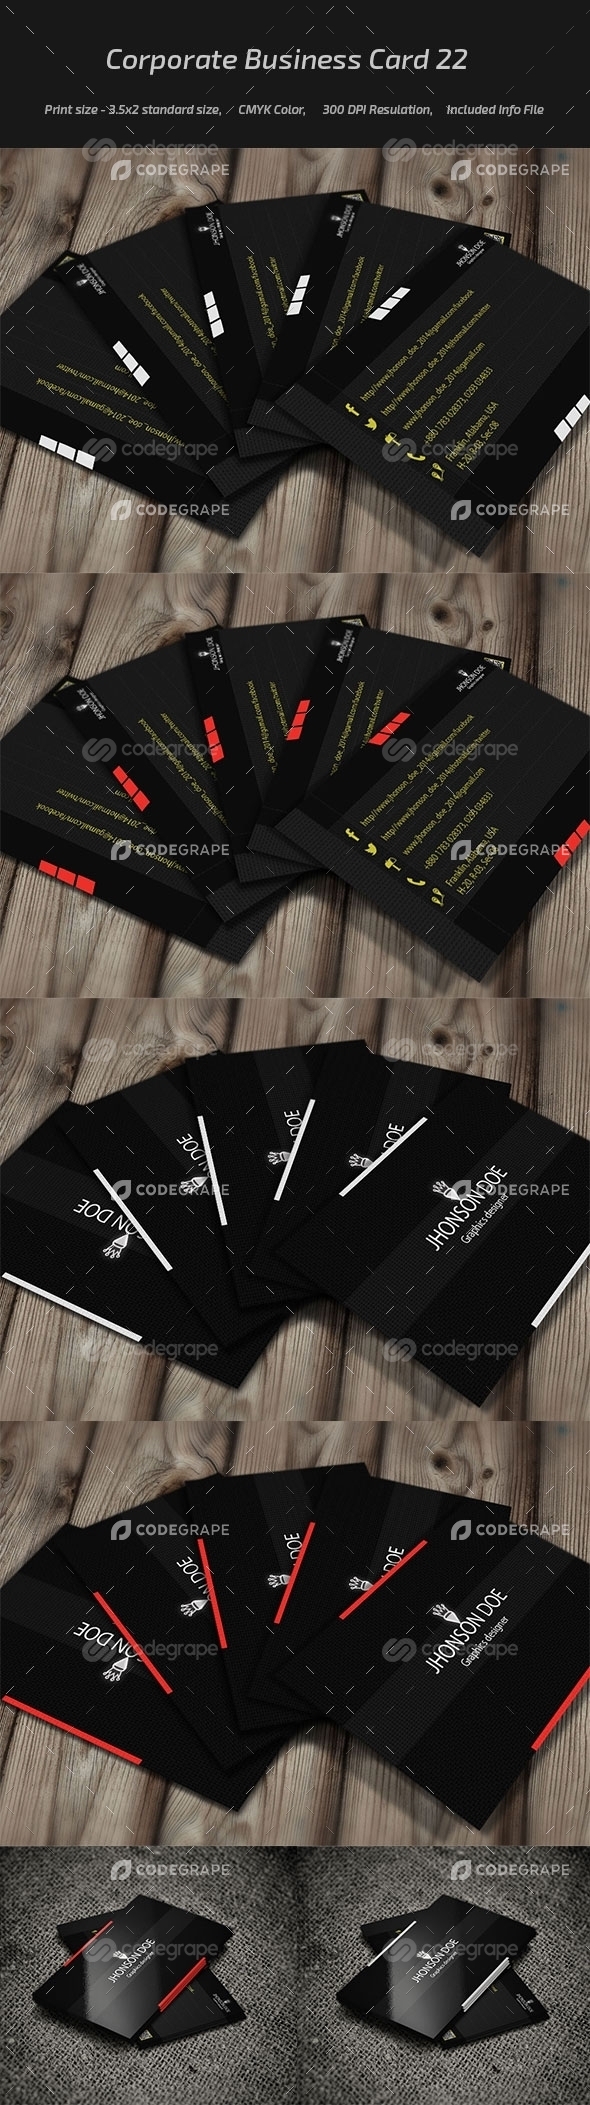 Corporate Business Card V 21